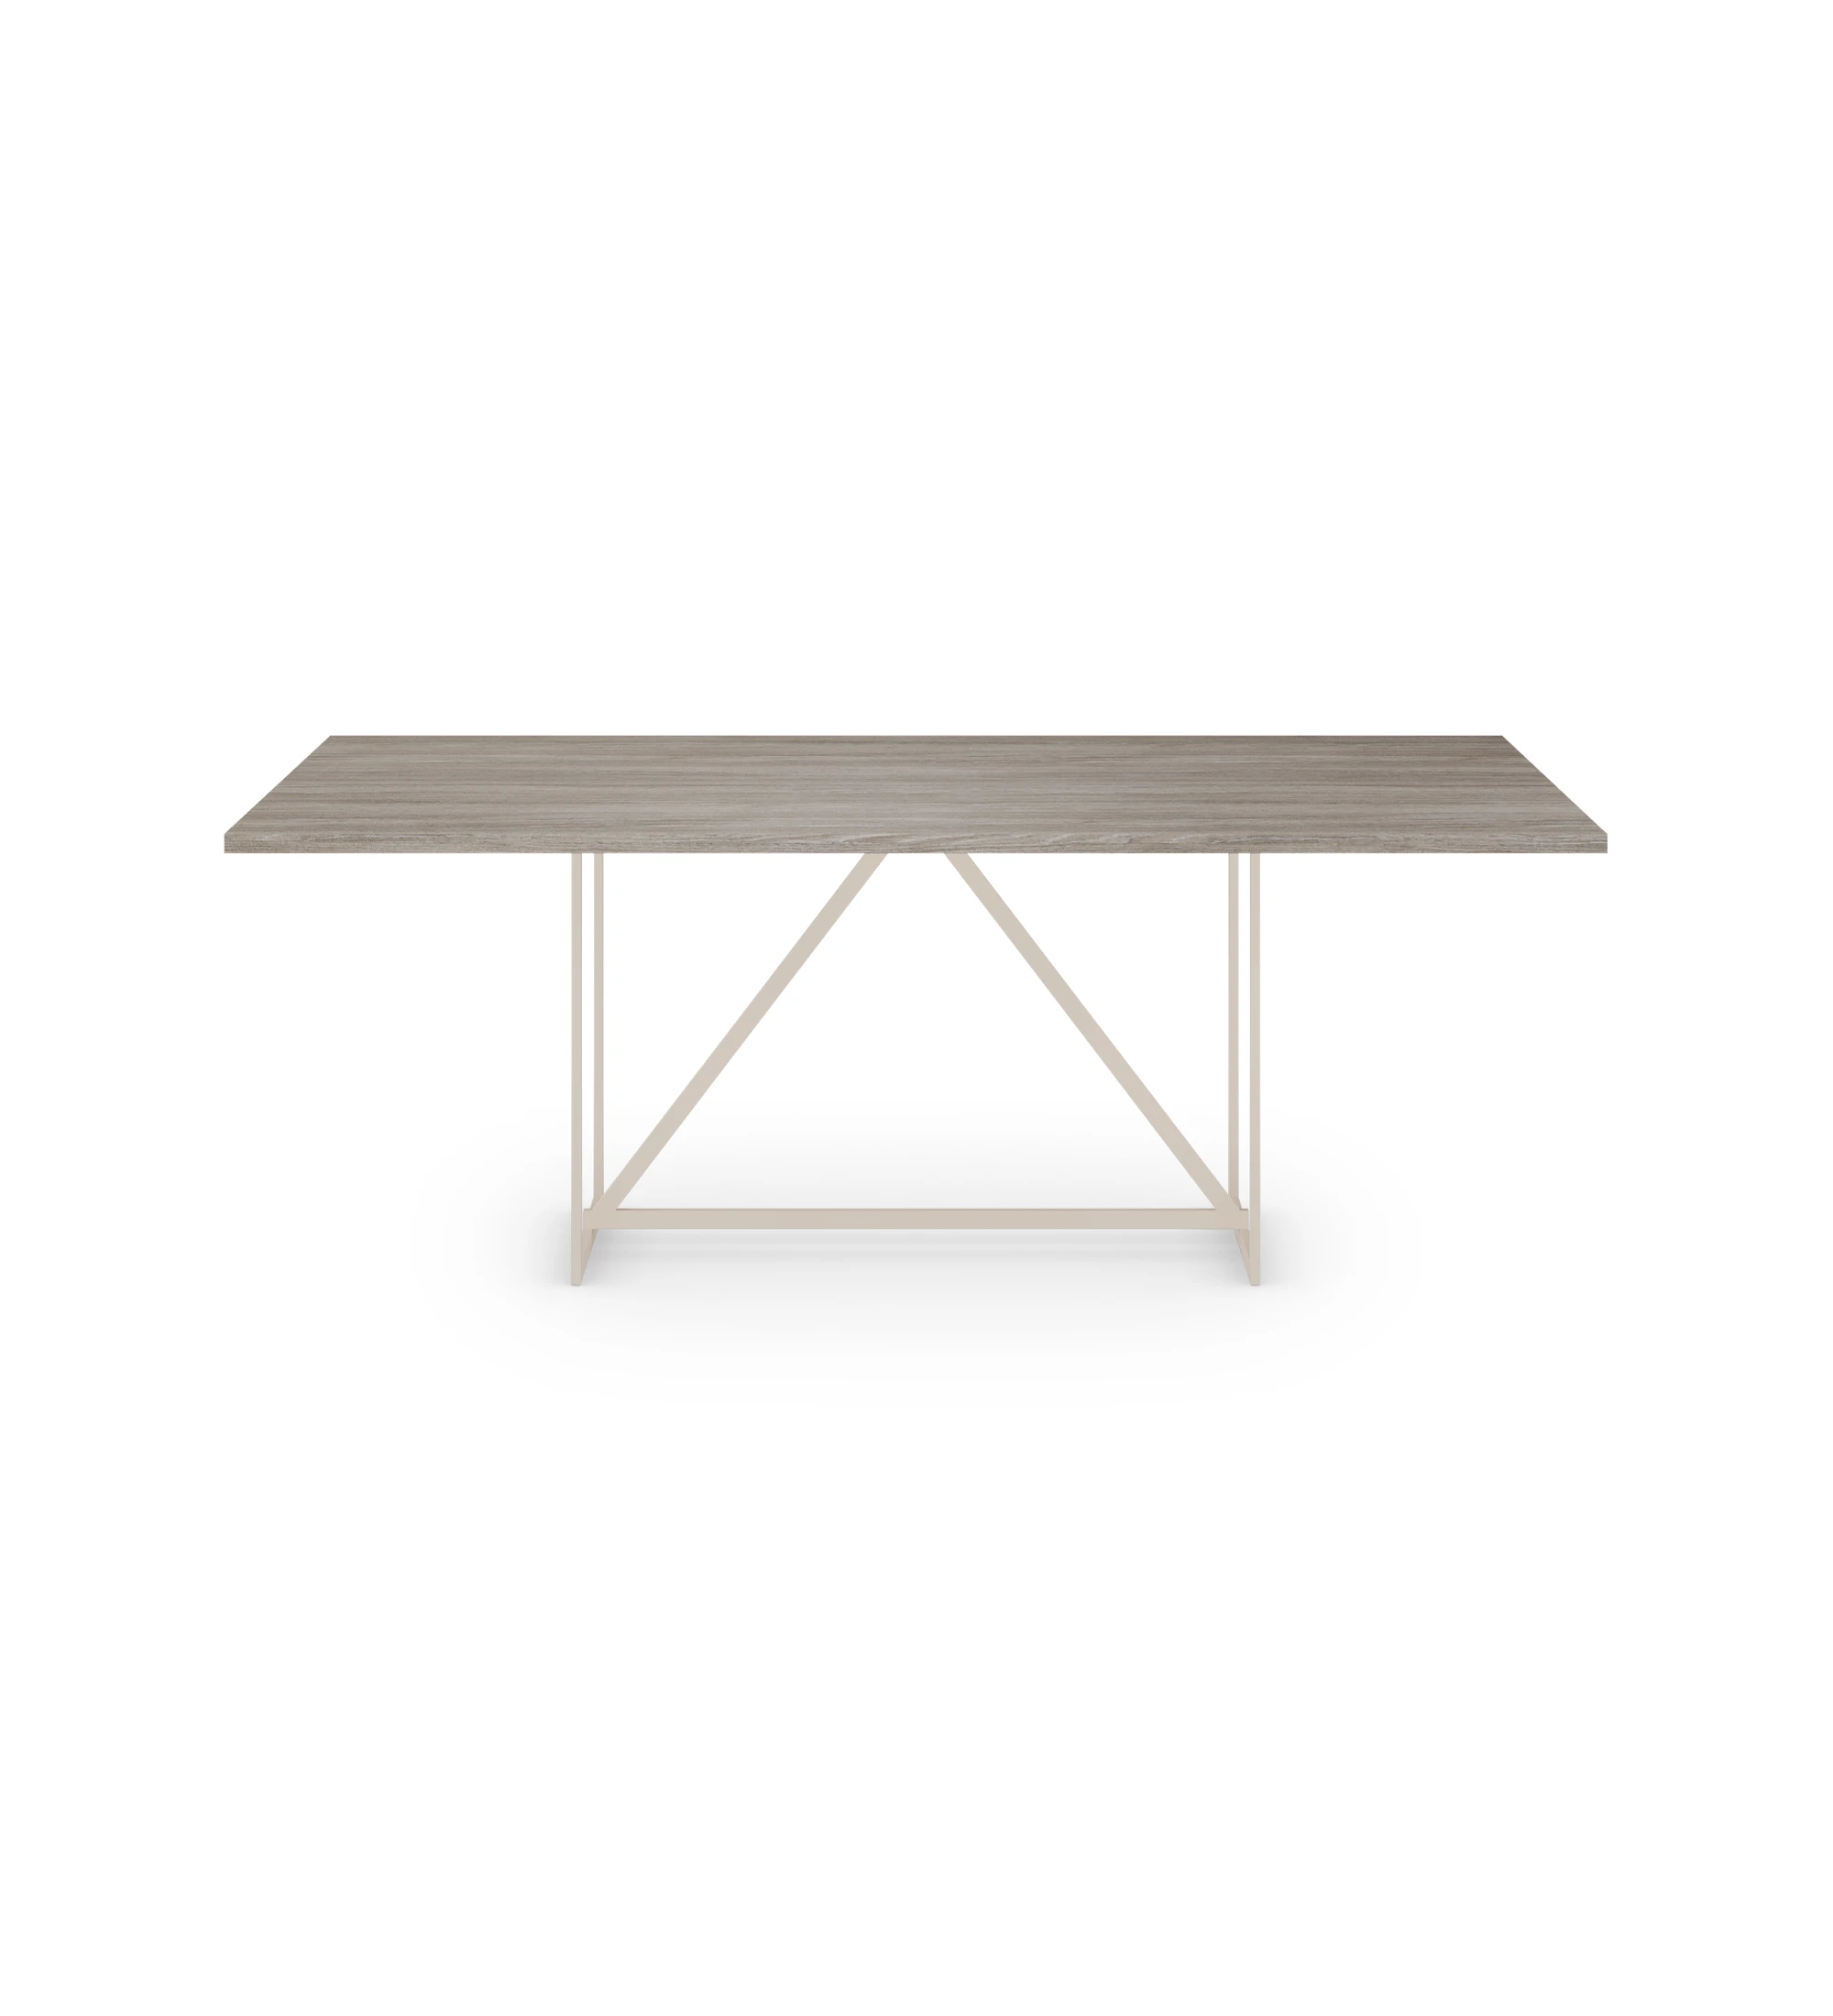 Chicago rectangular dining table 180 x 100 cm, decapé oak top, pearl lacquered metal feet.